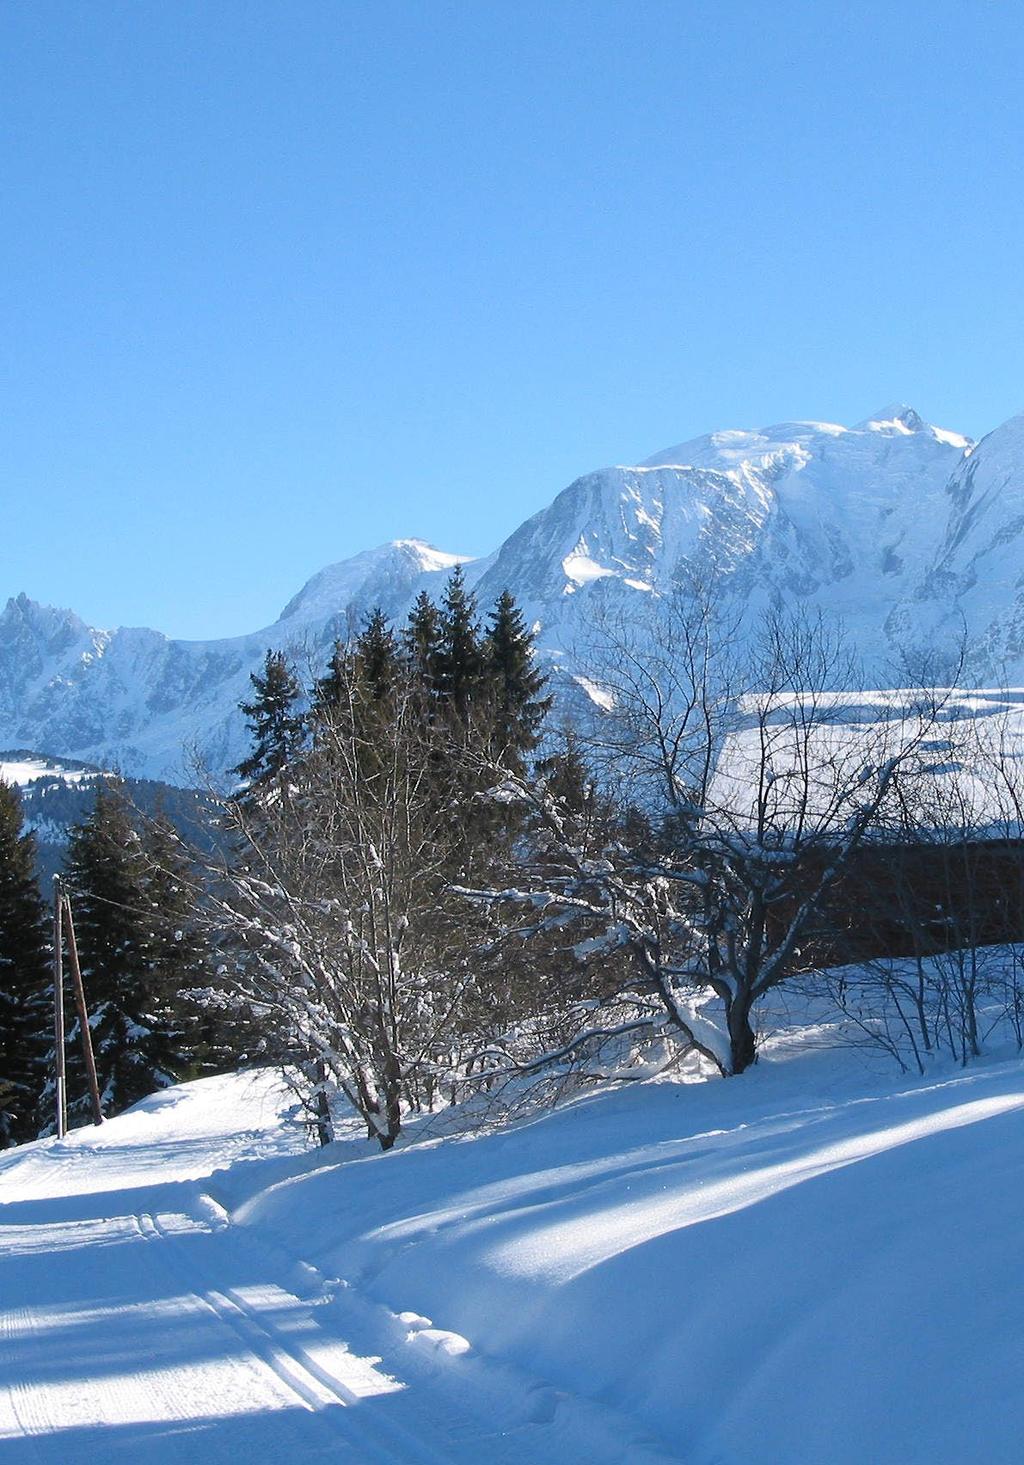 collection of chalets represents the very rare opportunity to own a detached ski property within a